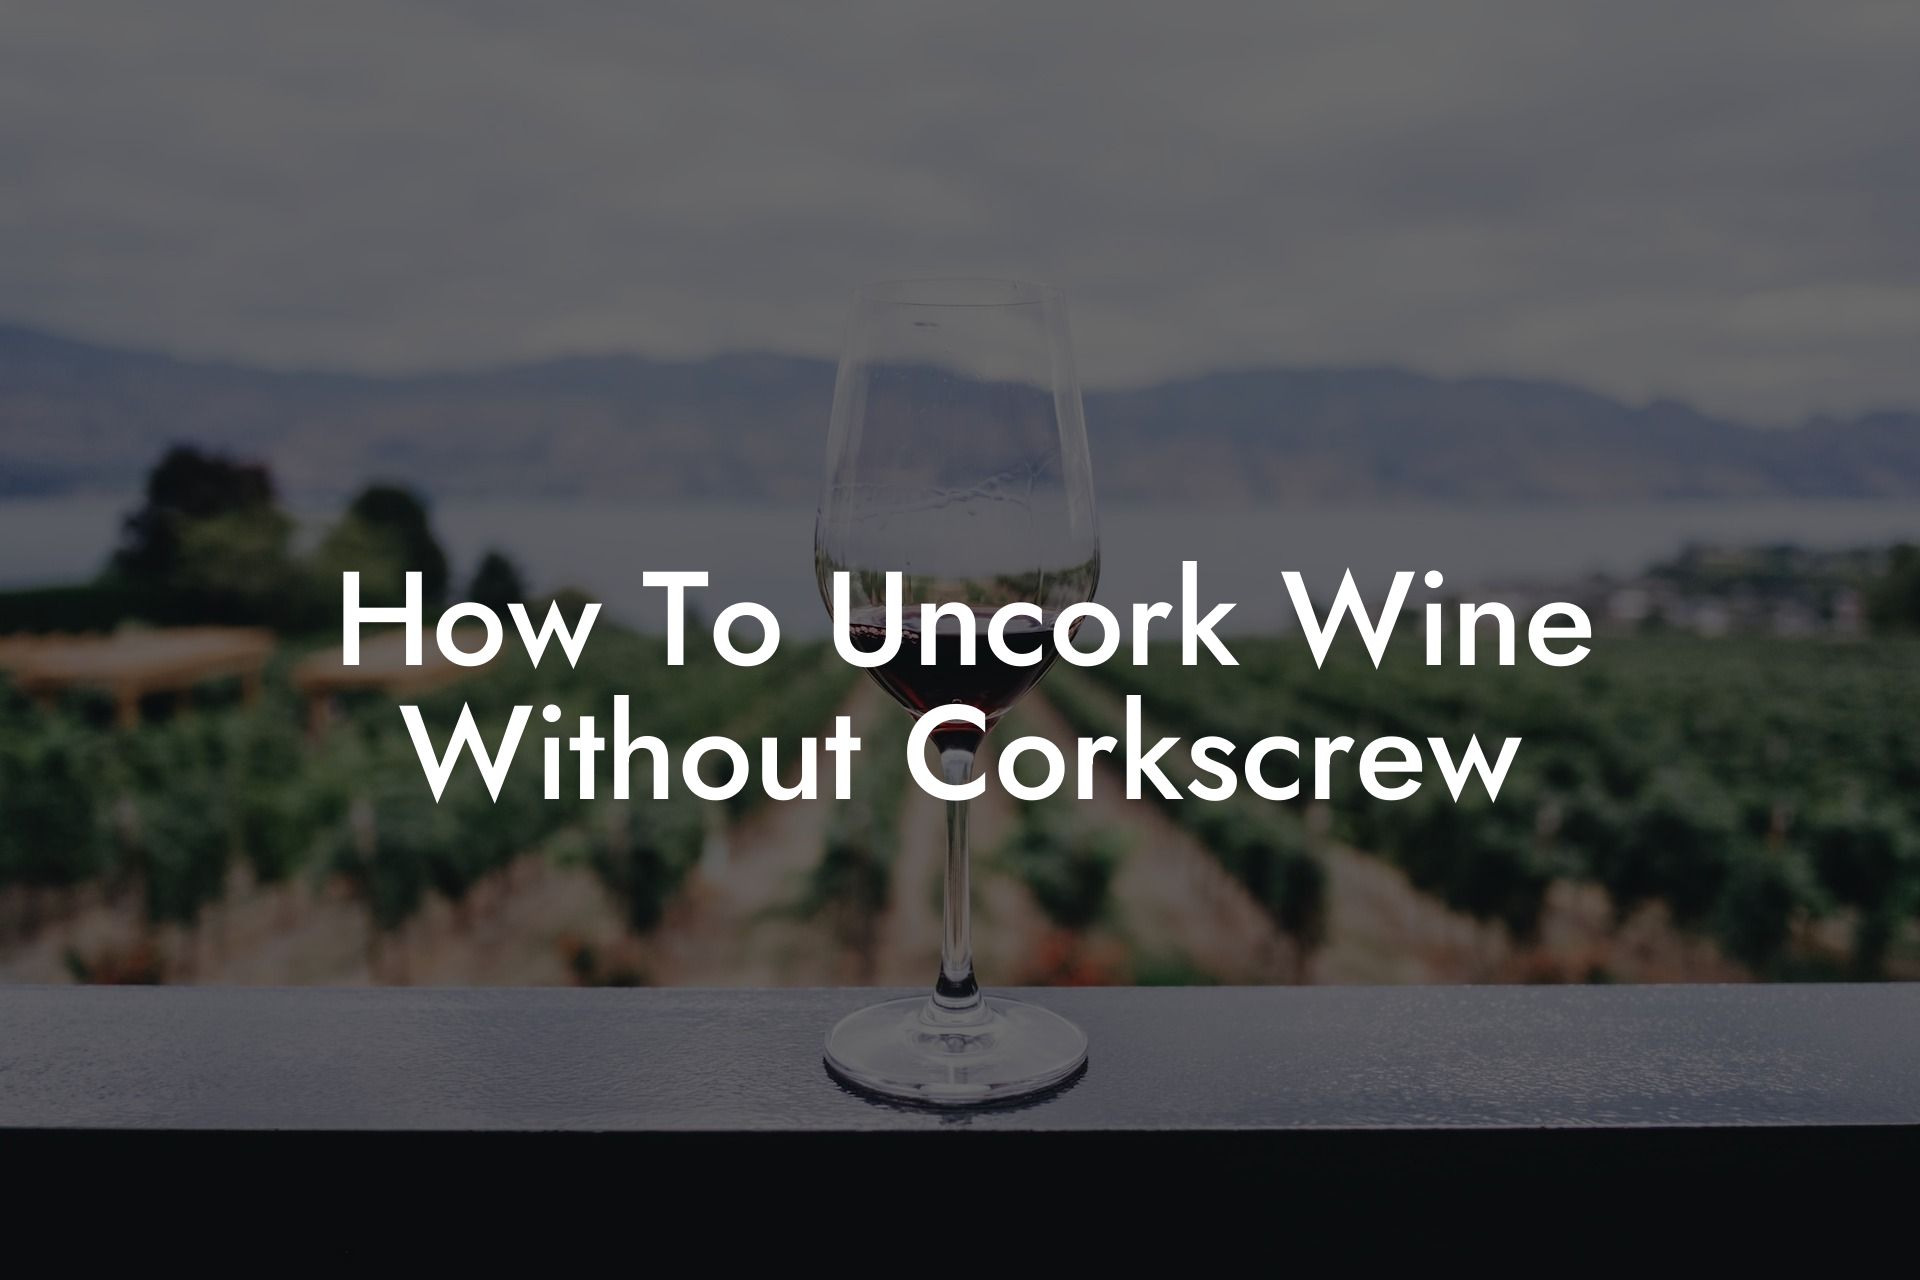 How To Uncork Wine Without Corkscrew